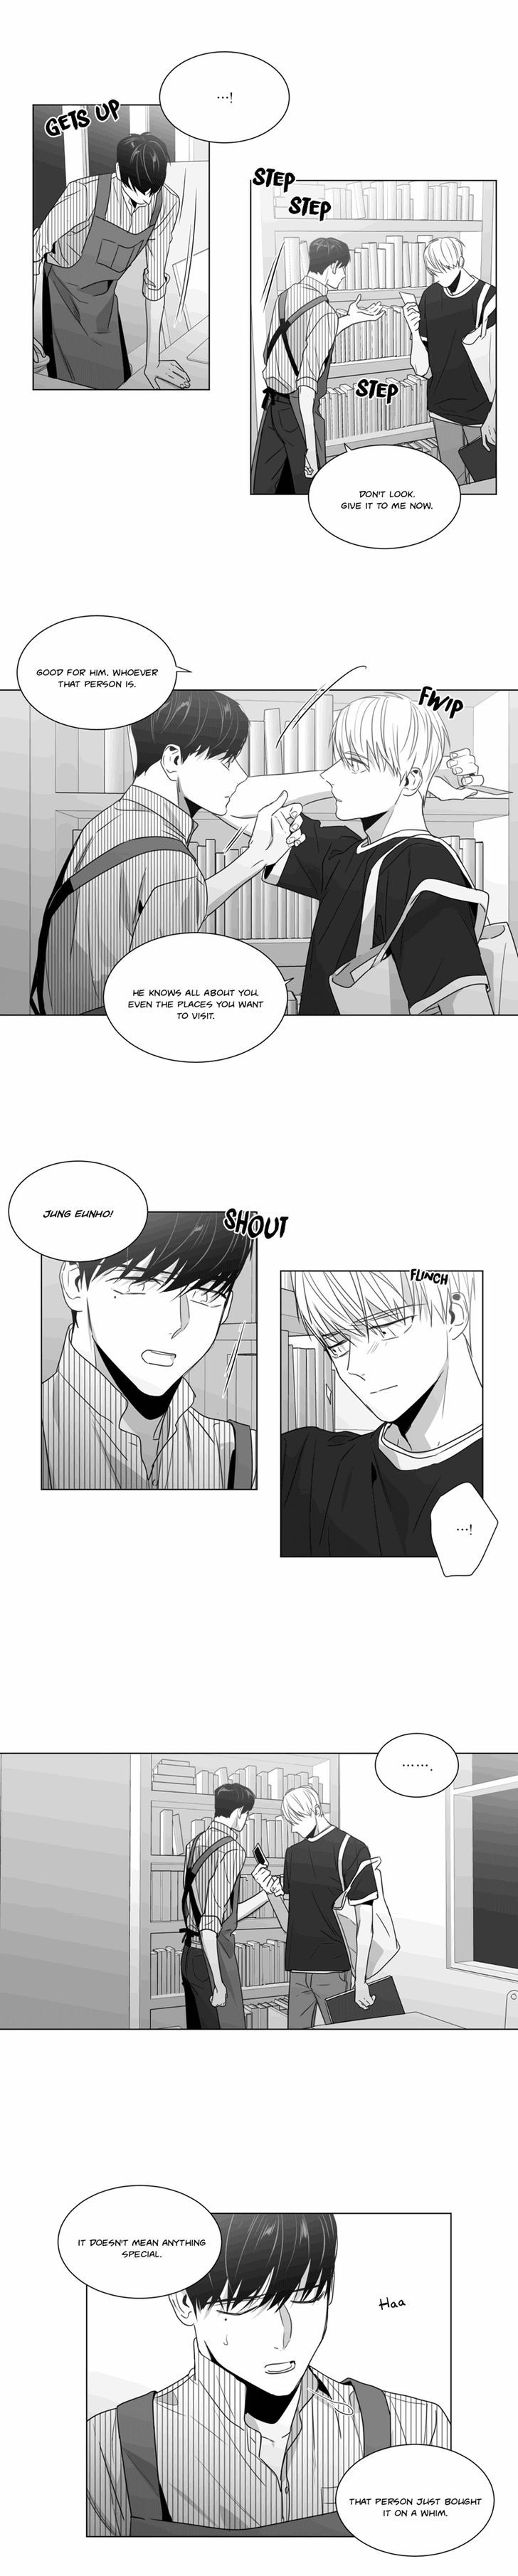 Lover Boy (Lezhin) Chapter 036 page 14